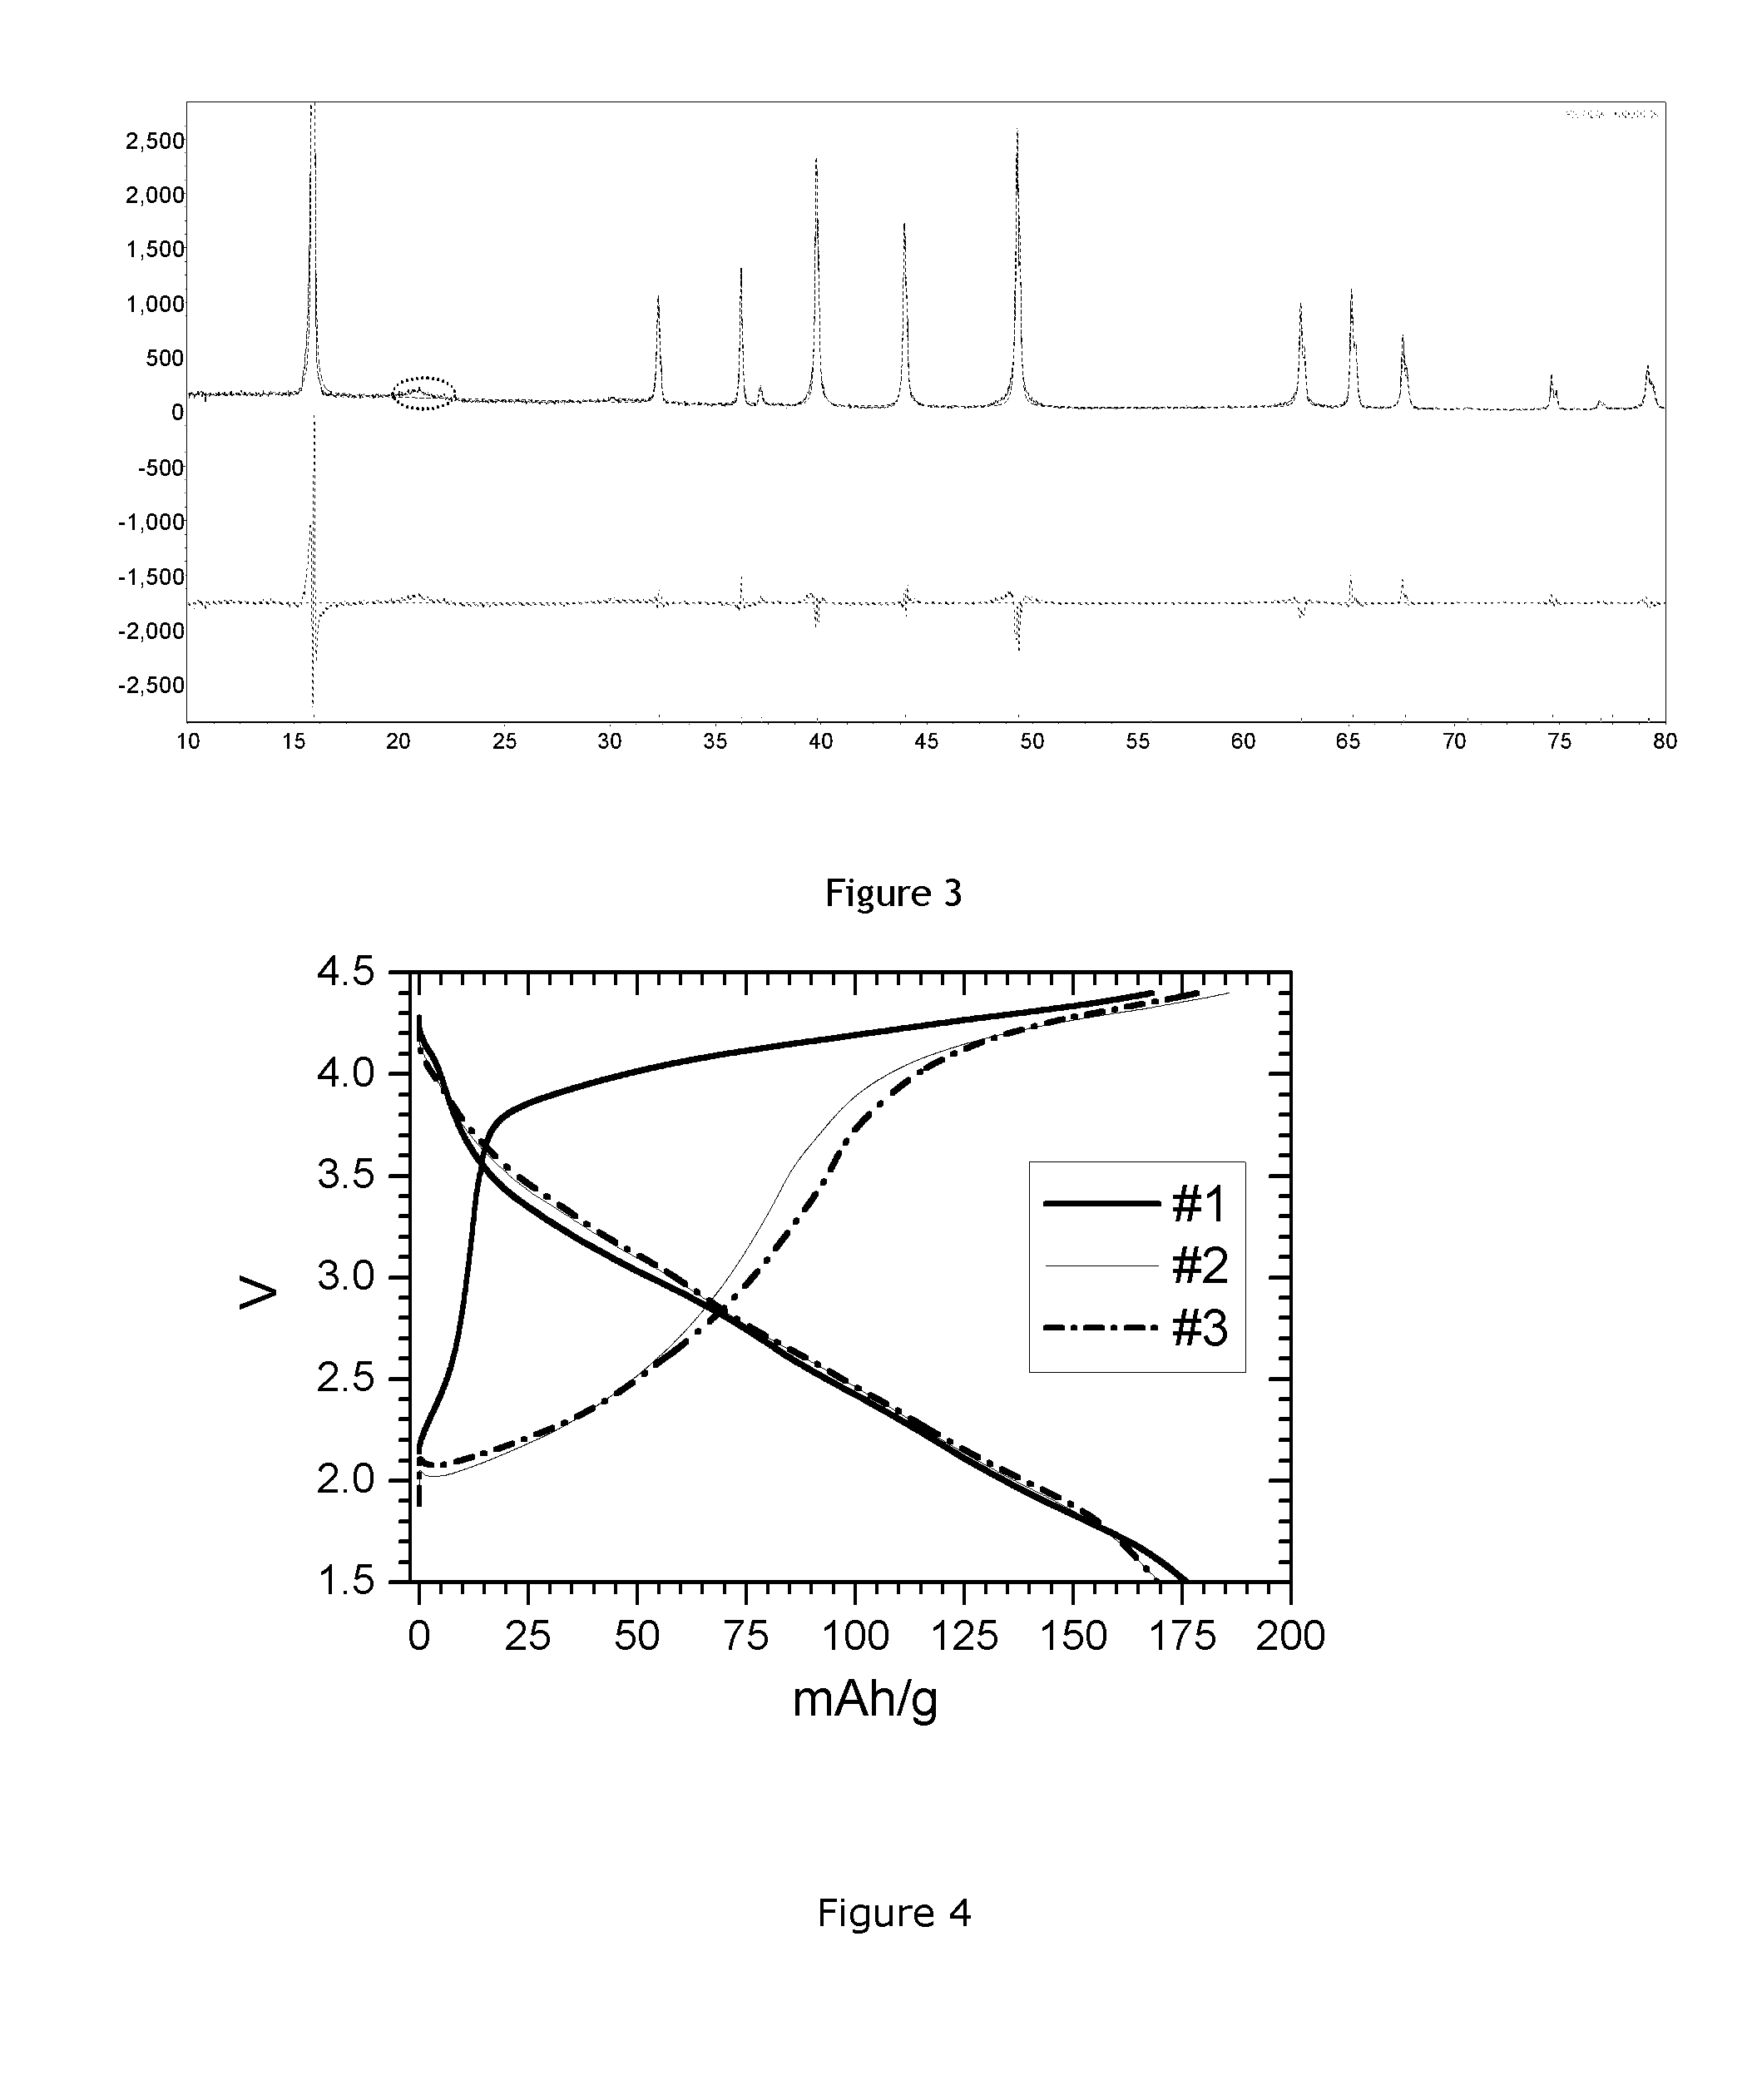 Doped Sodium Manganese Oxide Cathode Material for Sodium Ion Batteries